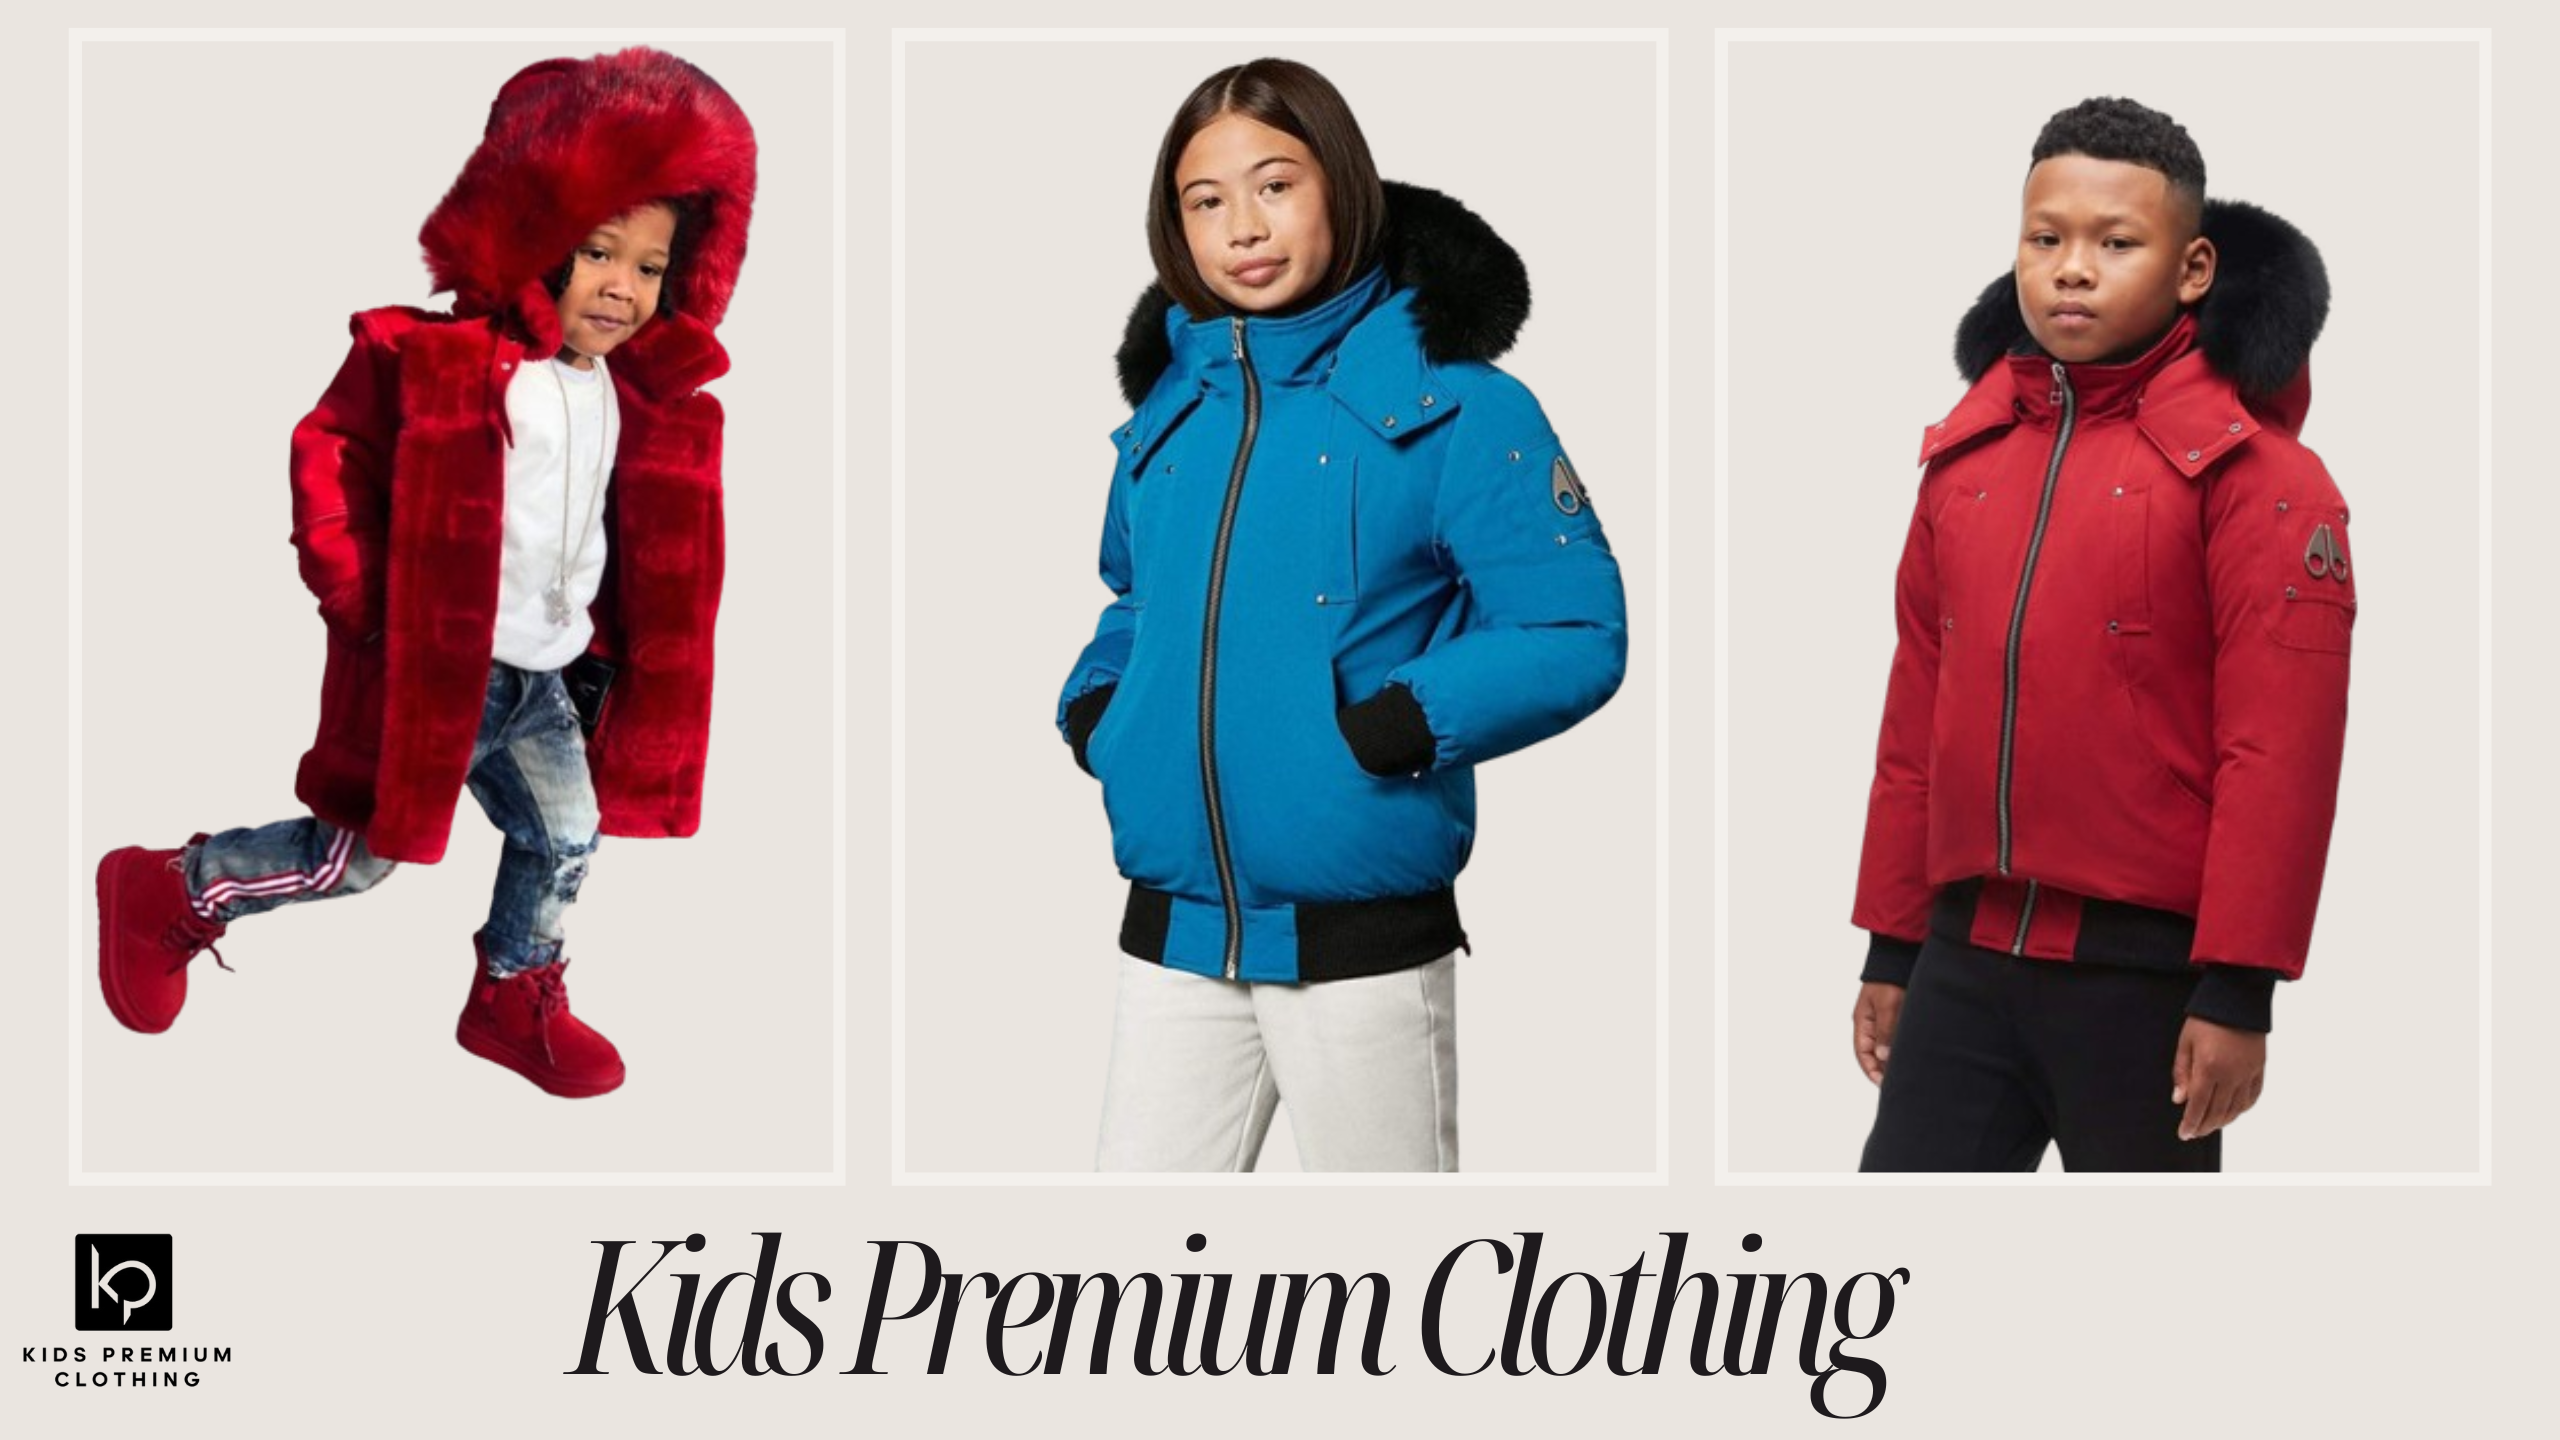 Discover How Kids Premium Clothing Makes Dressing Magical